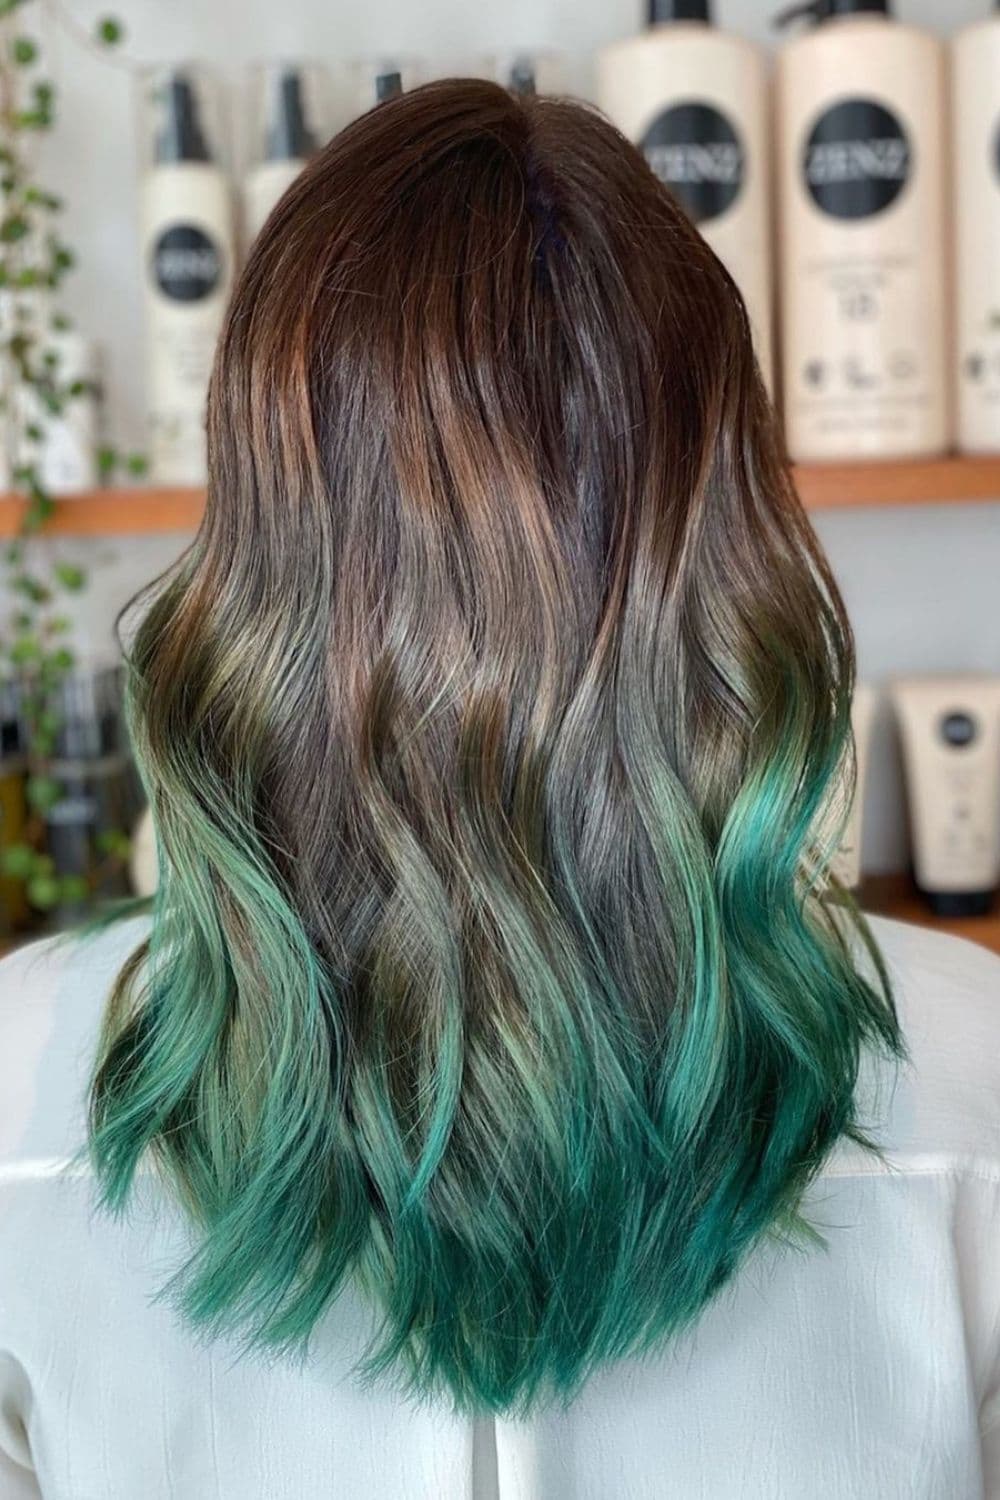 A woman with emerald green ombre hair.